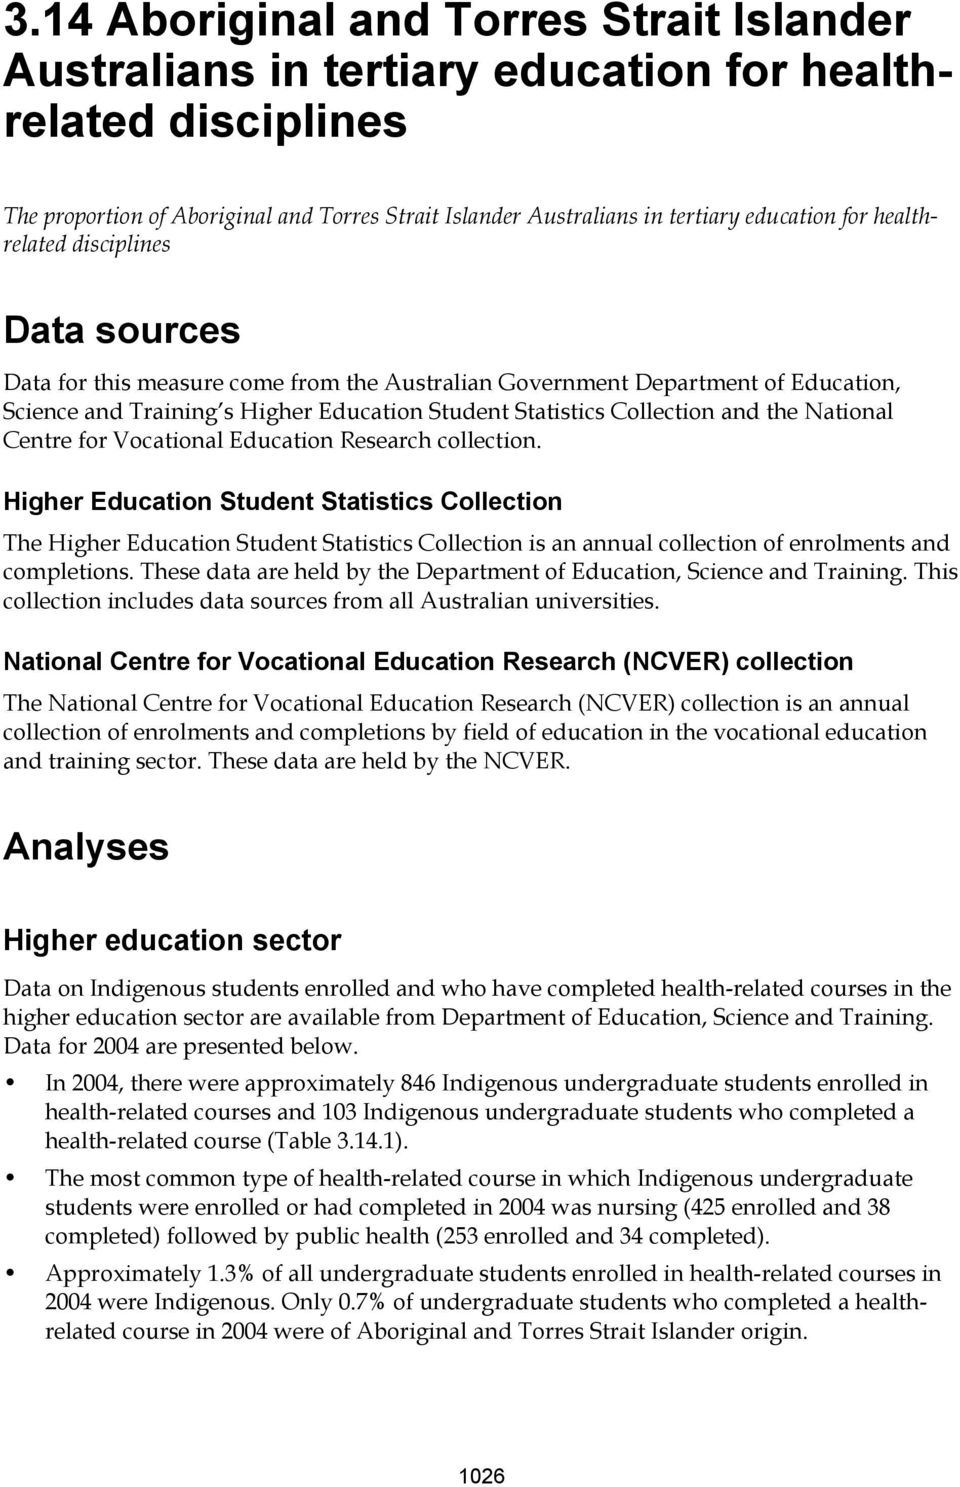 the National Centre for Vocational Education Research collection.